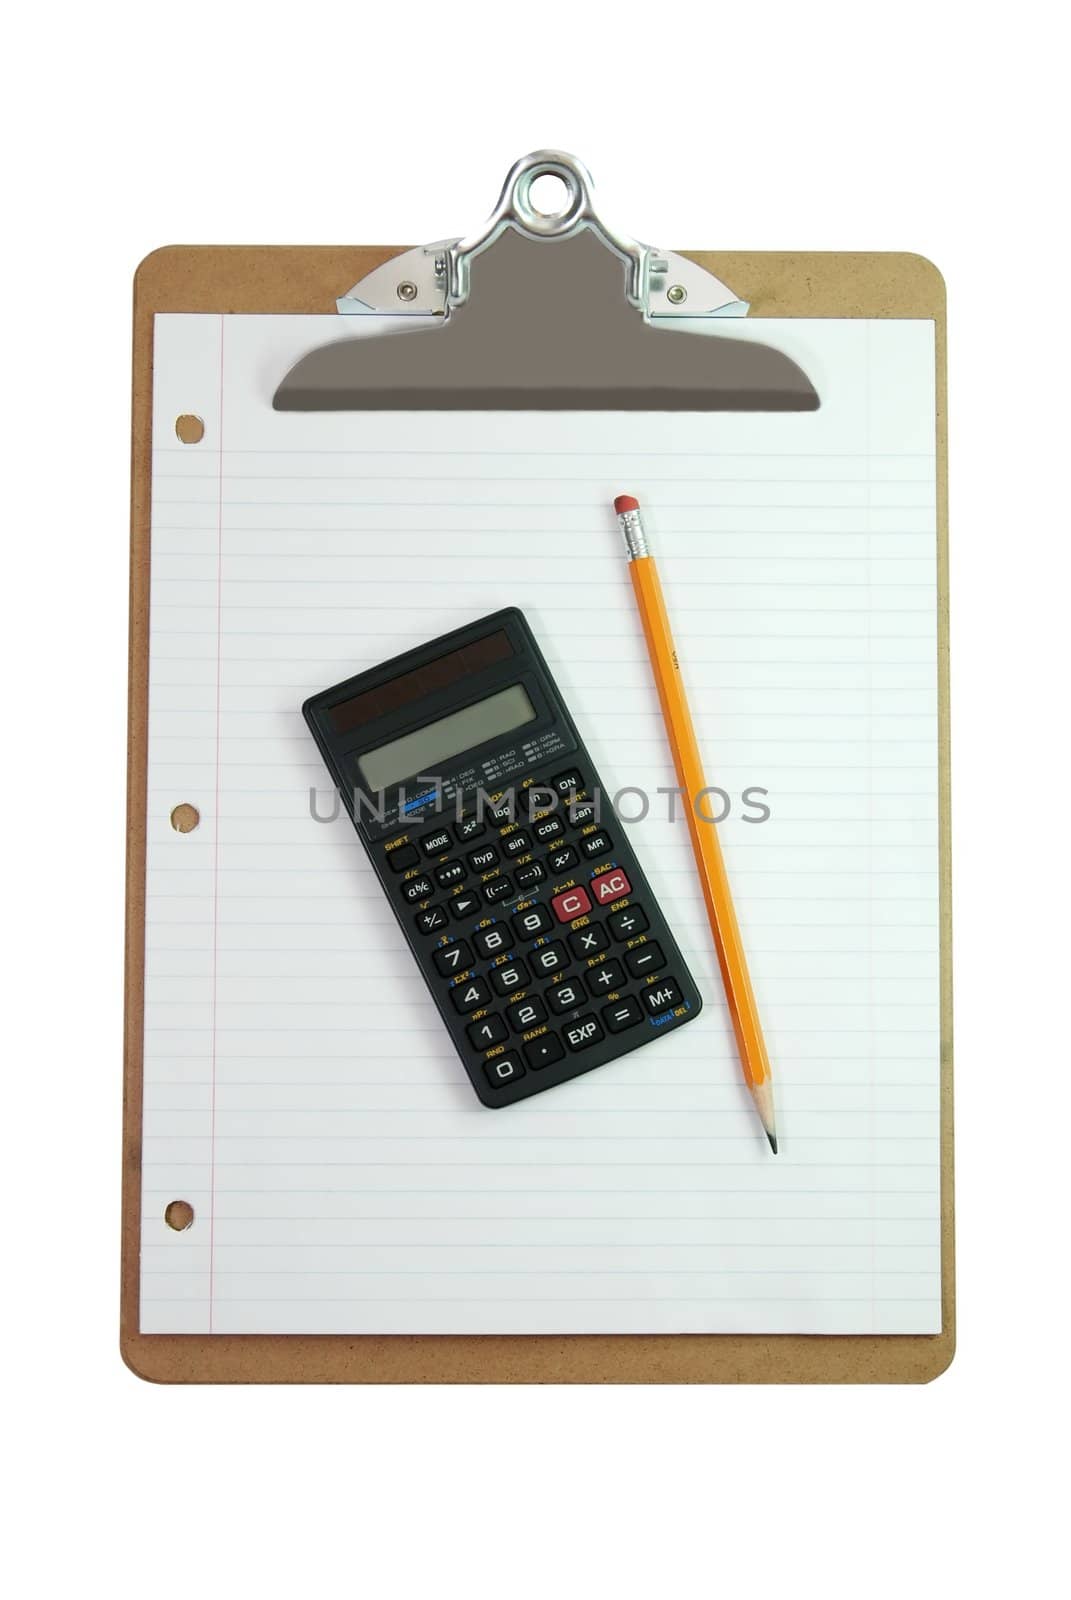 Clipboard, Calculator, Pencil, and Paper by dehooks